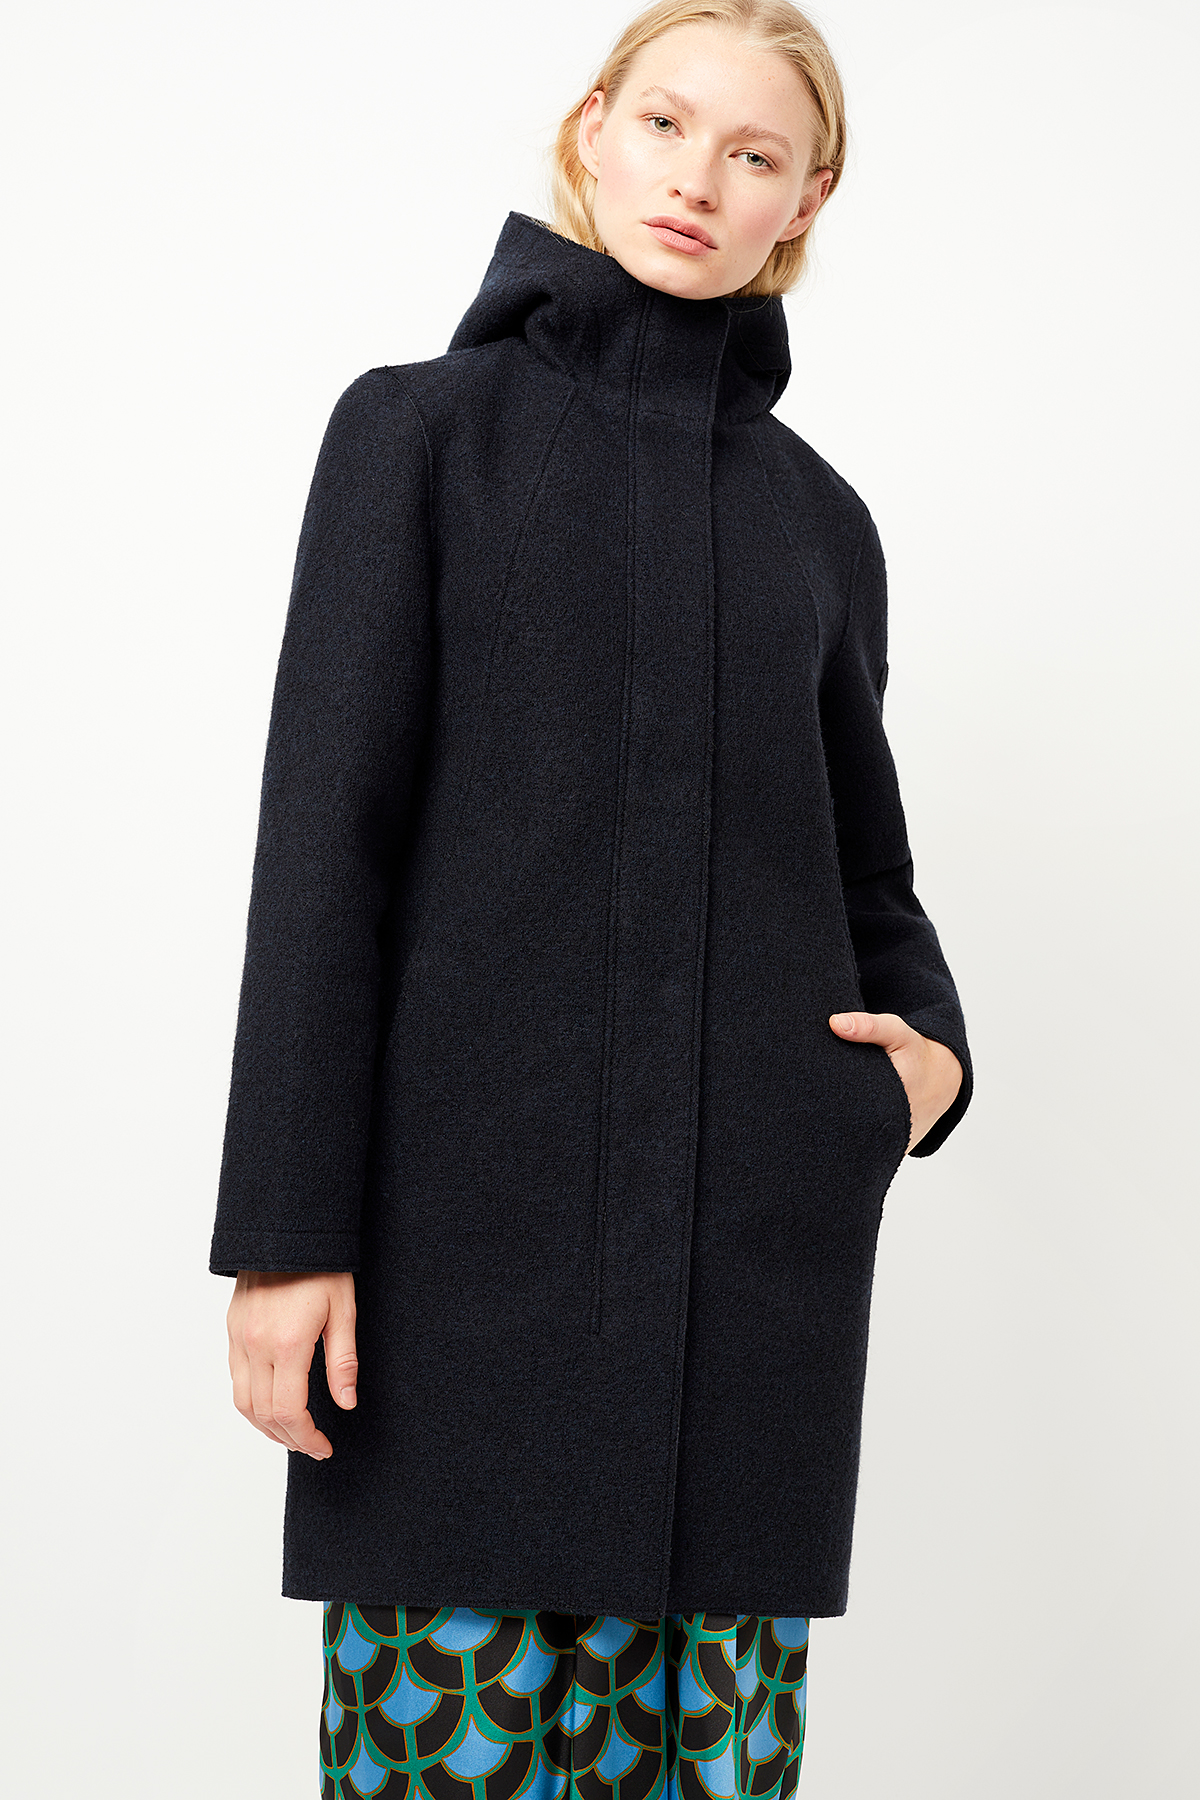 Wollparka Coat Risana mit Wolle carbon